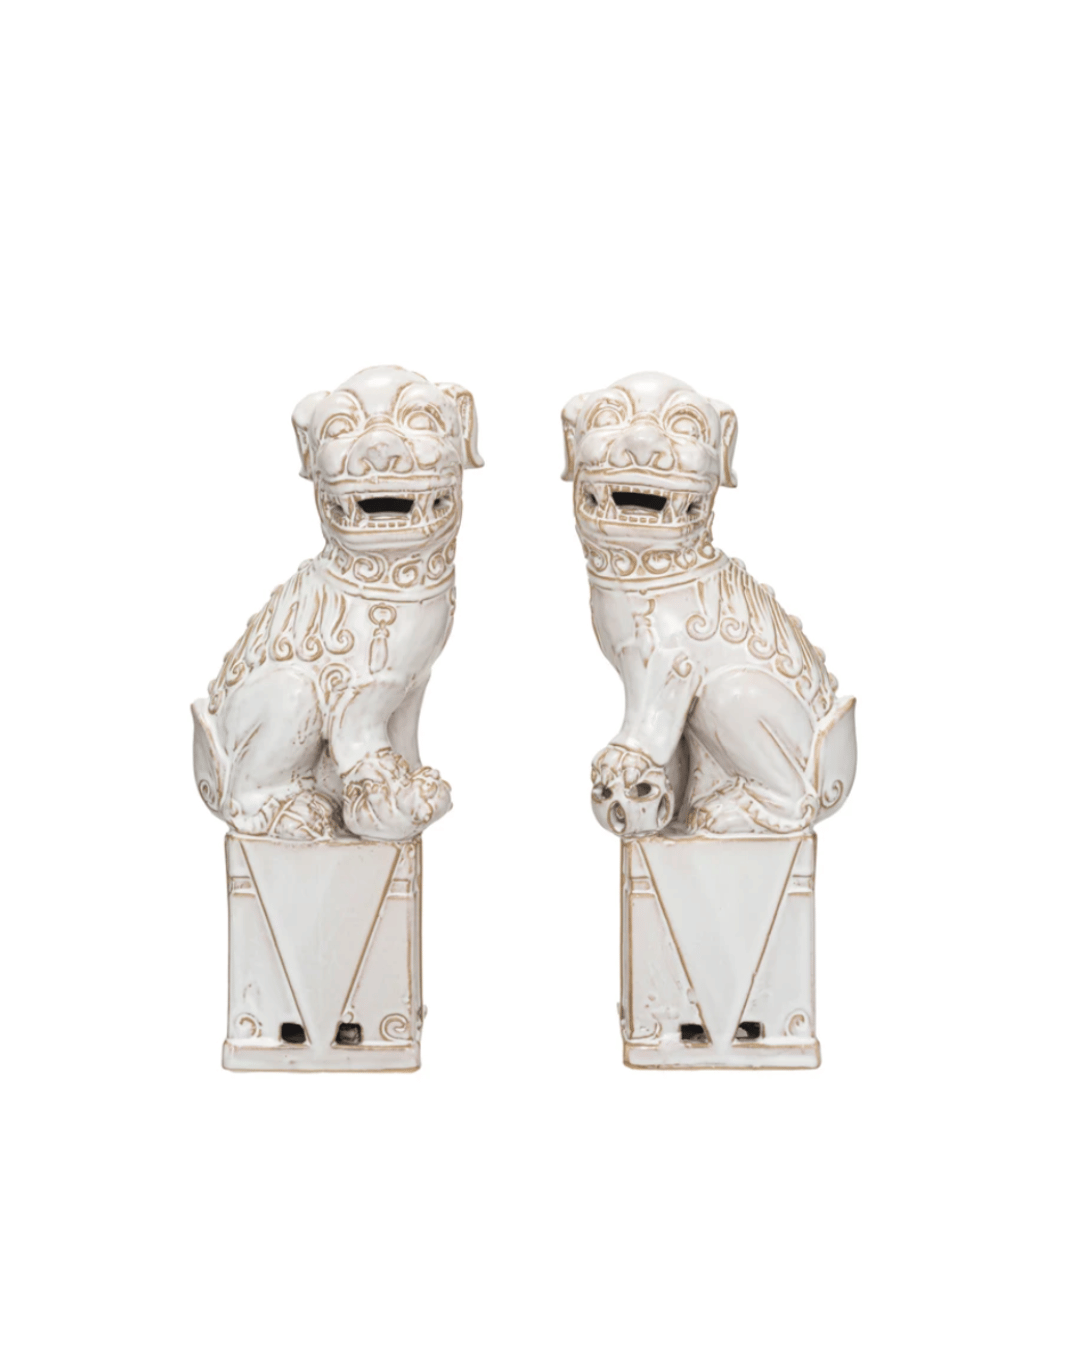 Foo Dog Bookends S/2